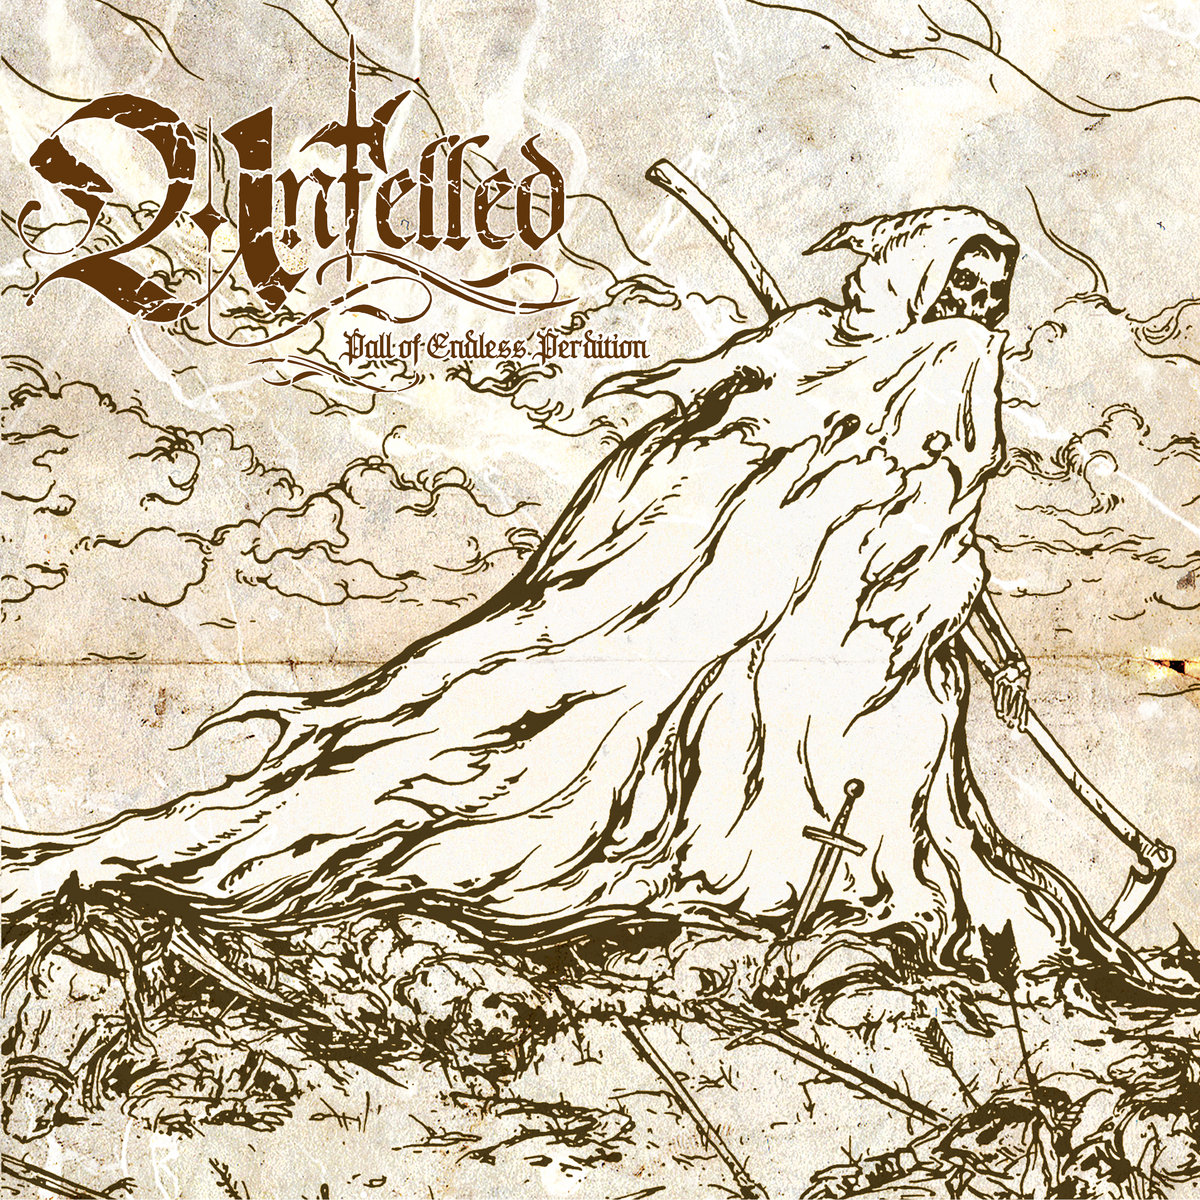 Unfelled - "Pall Of Endless Perdition" - 2023